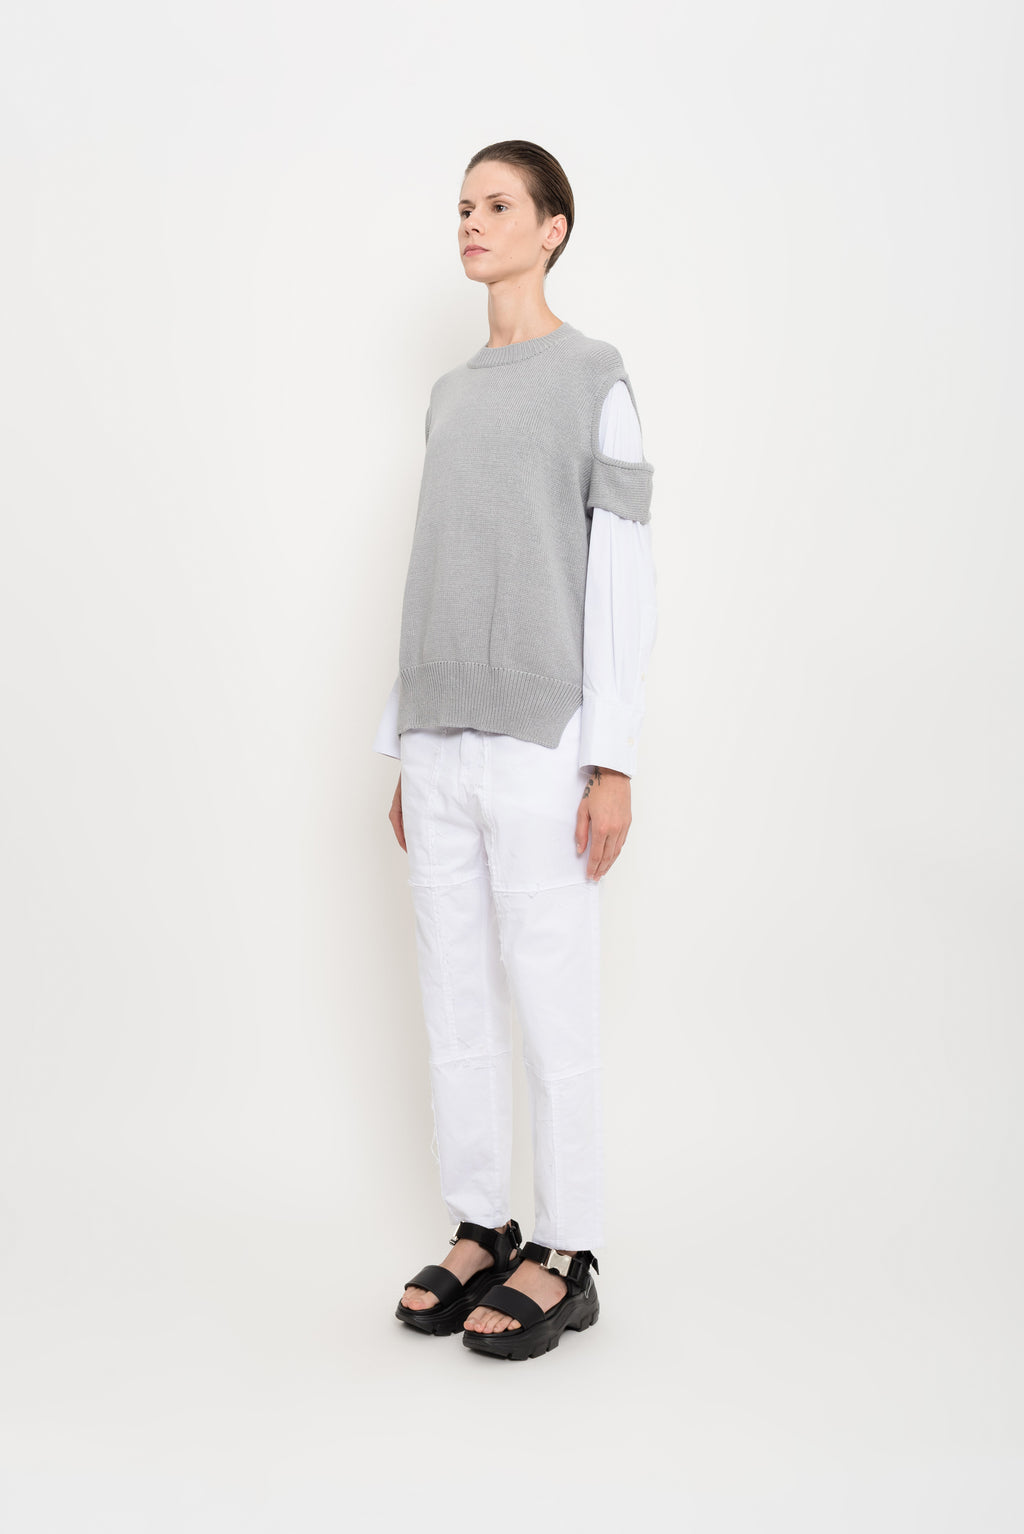 Knit Top with Shirt Sleeves | Boldo